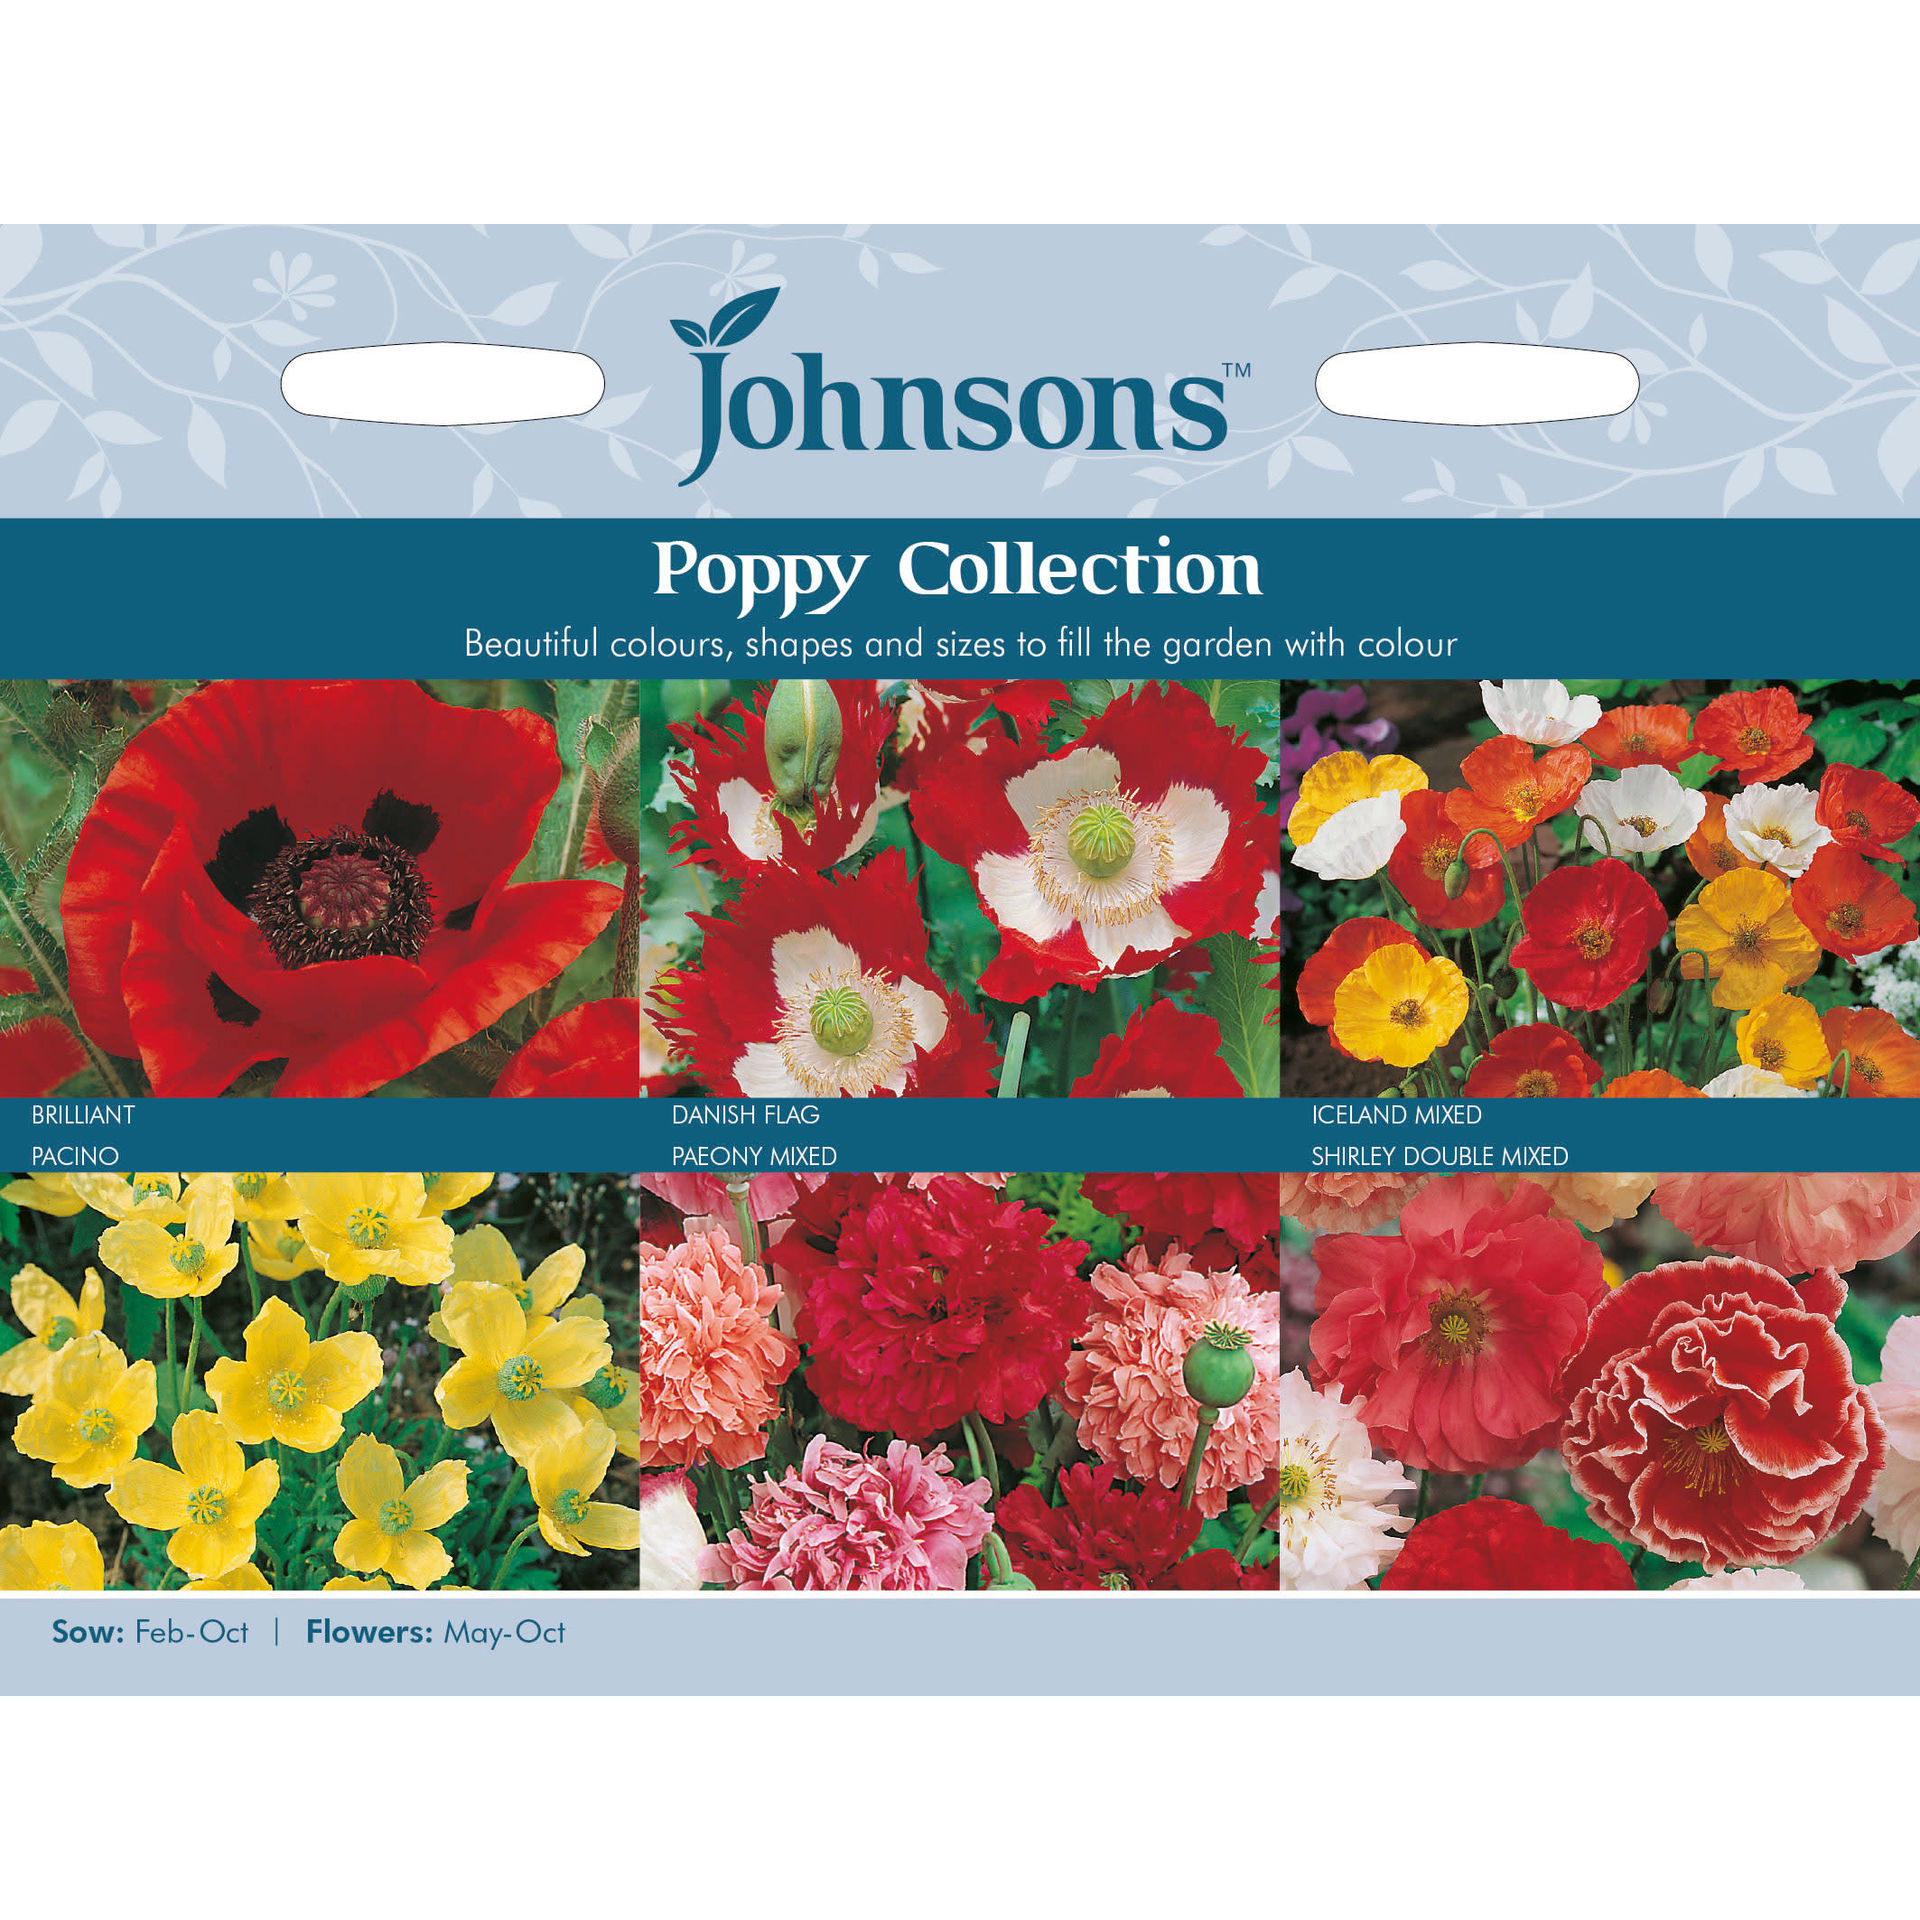 Johnsons Poppy Seed Collection